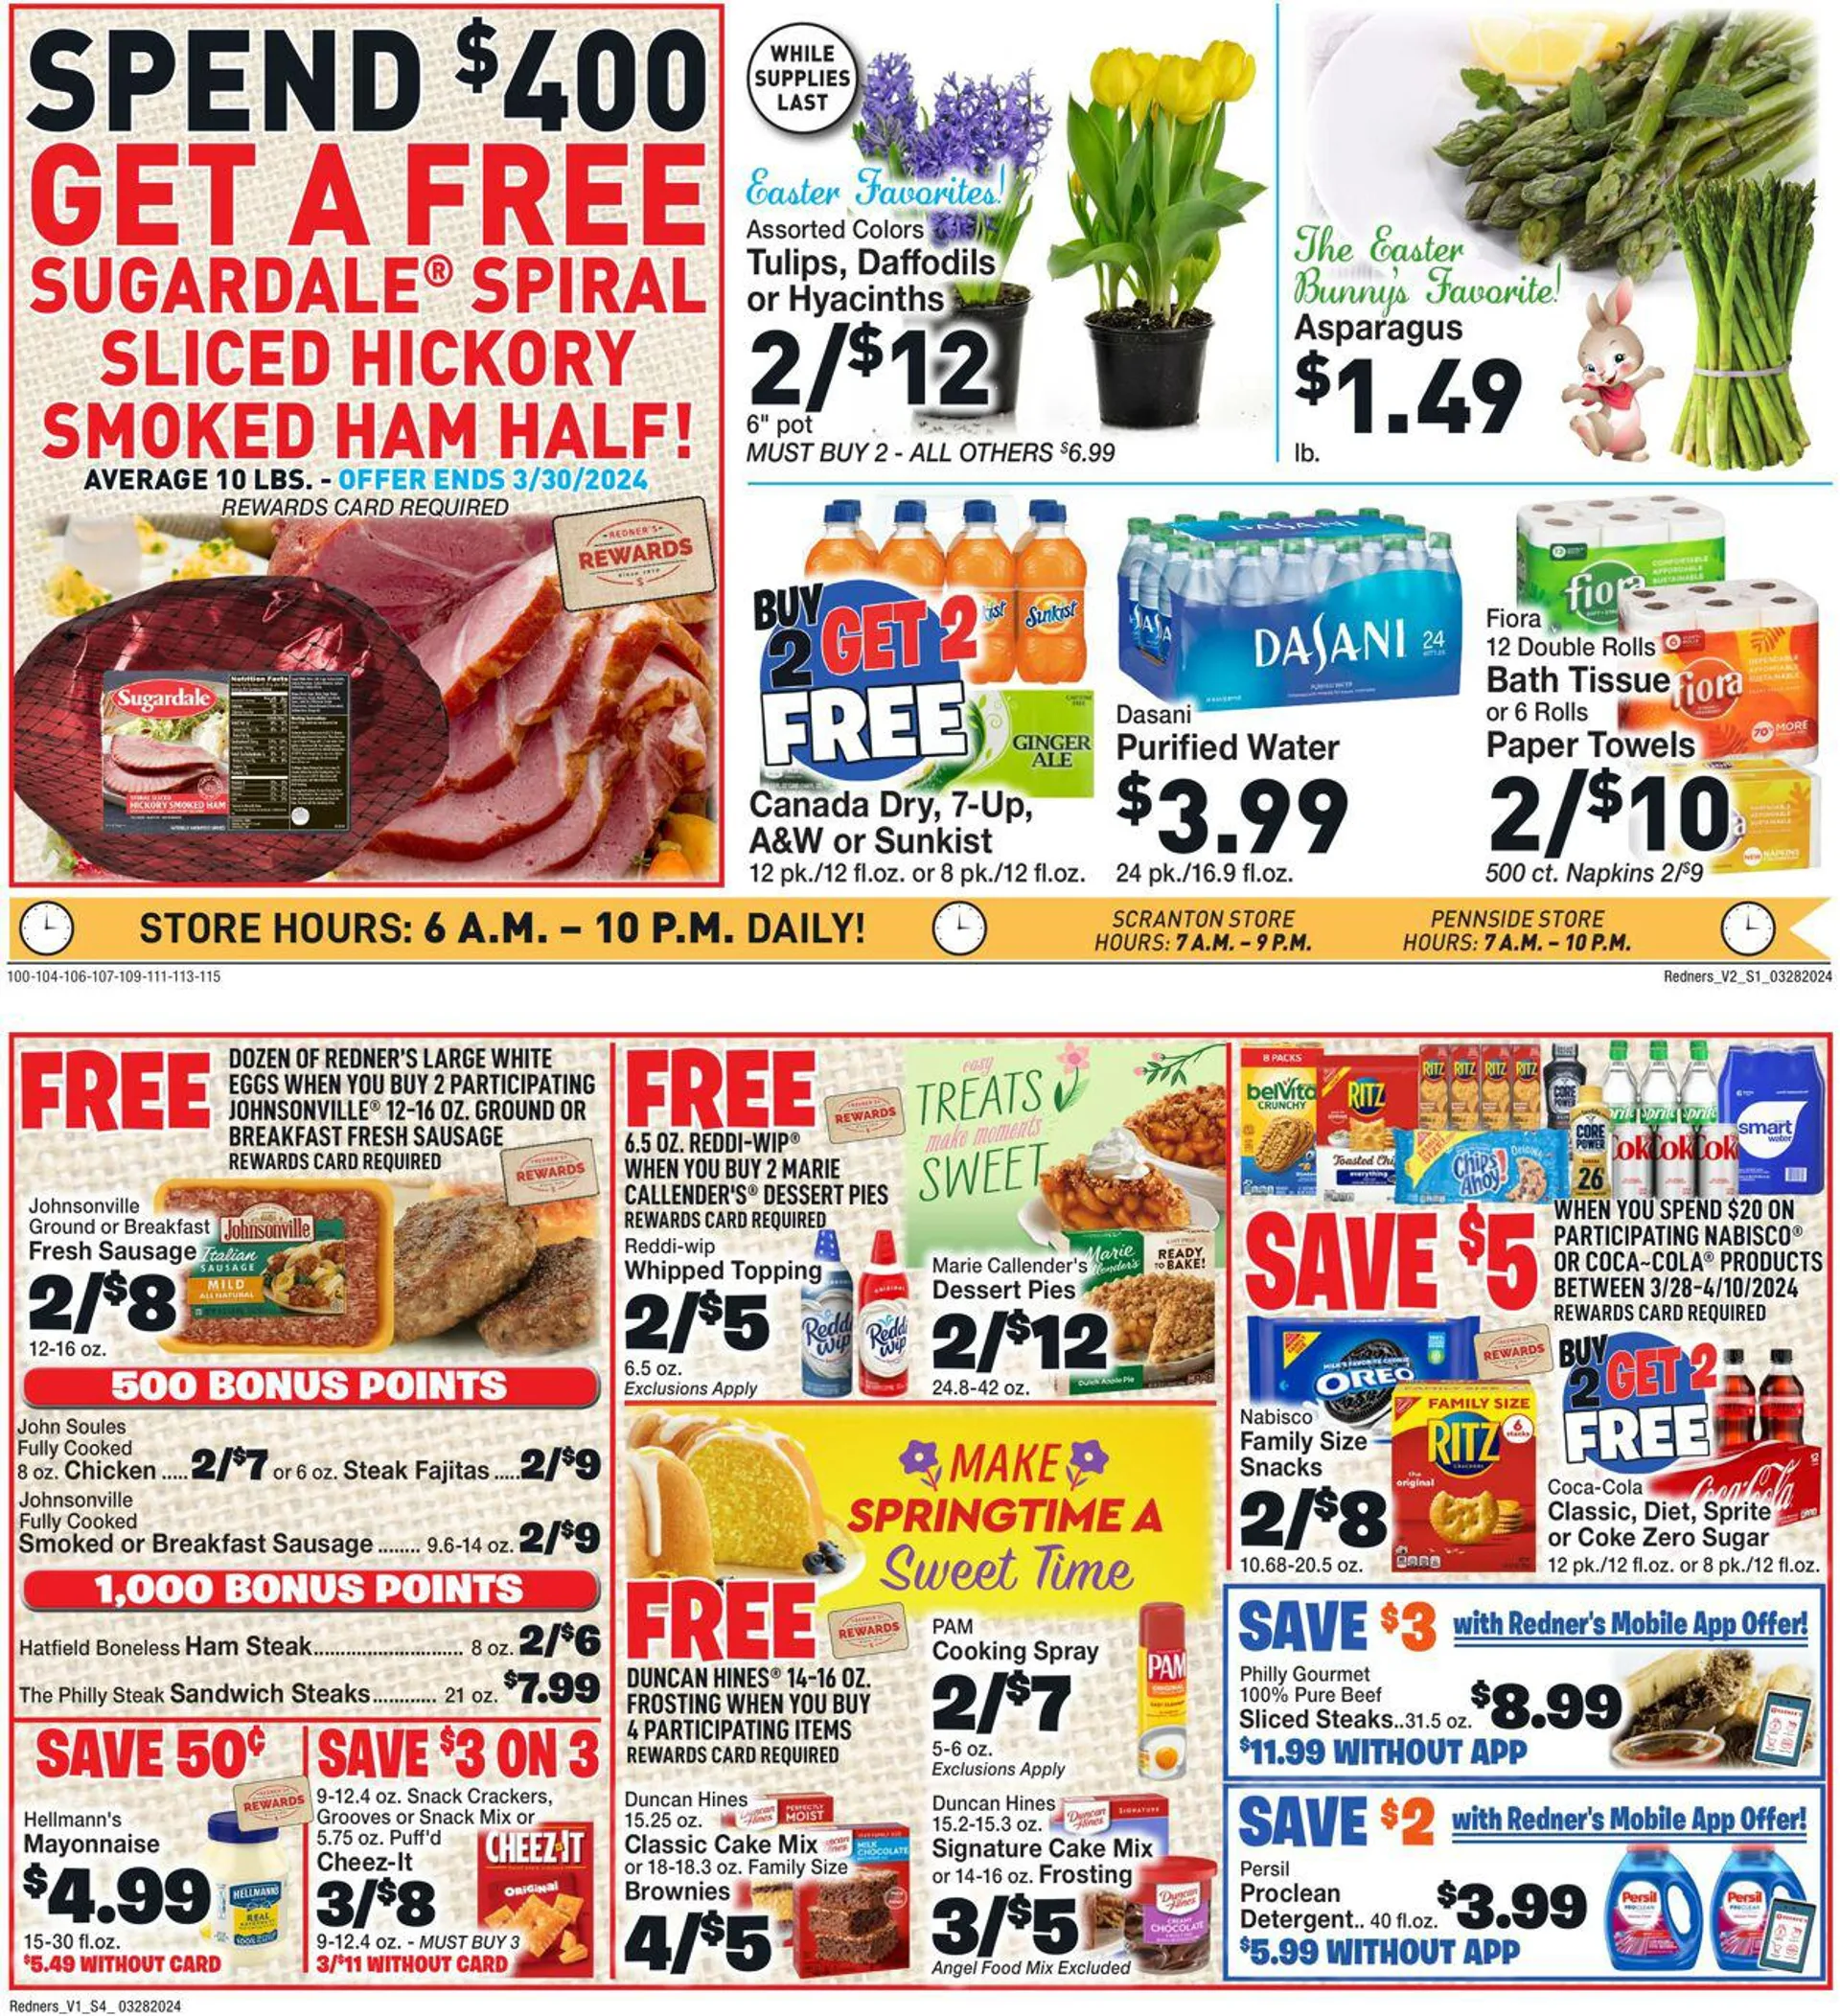 Weekly ad Redner’s Warehouse Market Current weekly ad from March 28 to April 3 2024 - Page 2